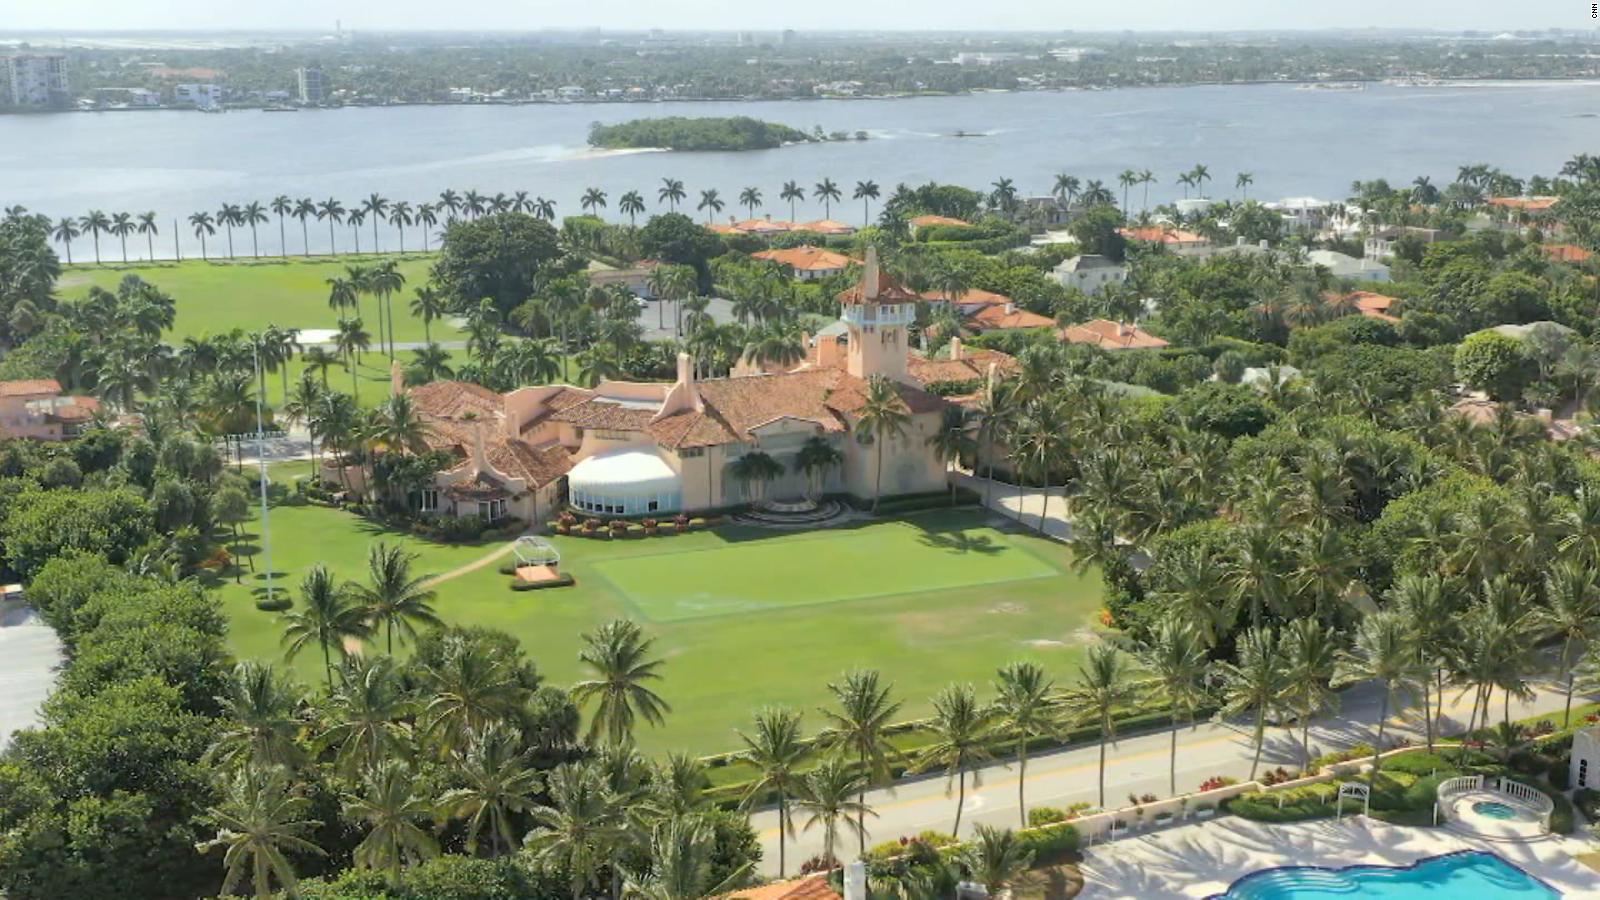 Closure at Mar-A-Lago due to covid-19 outbreak